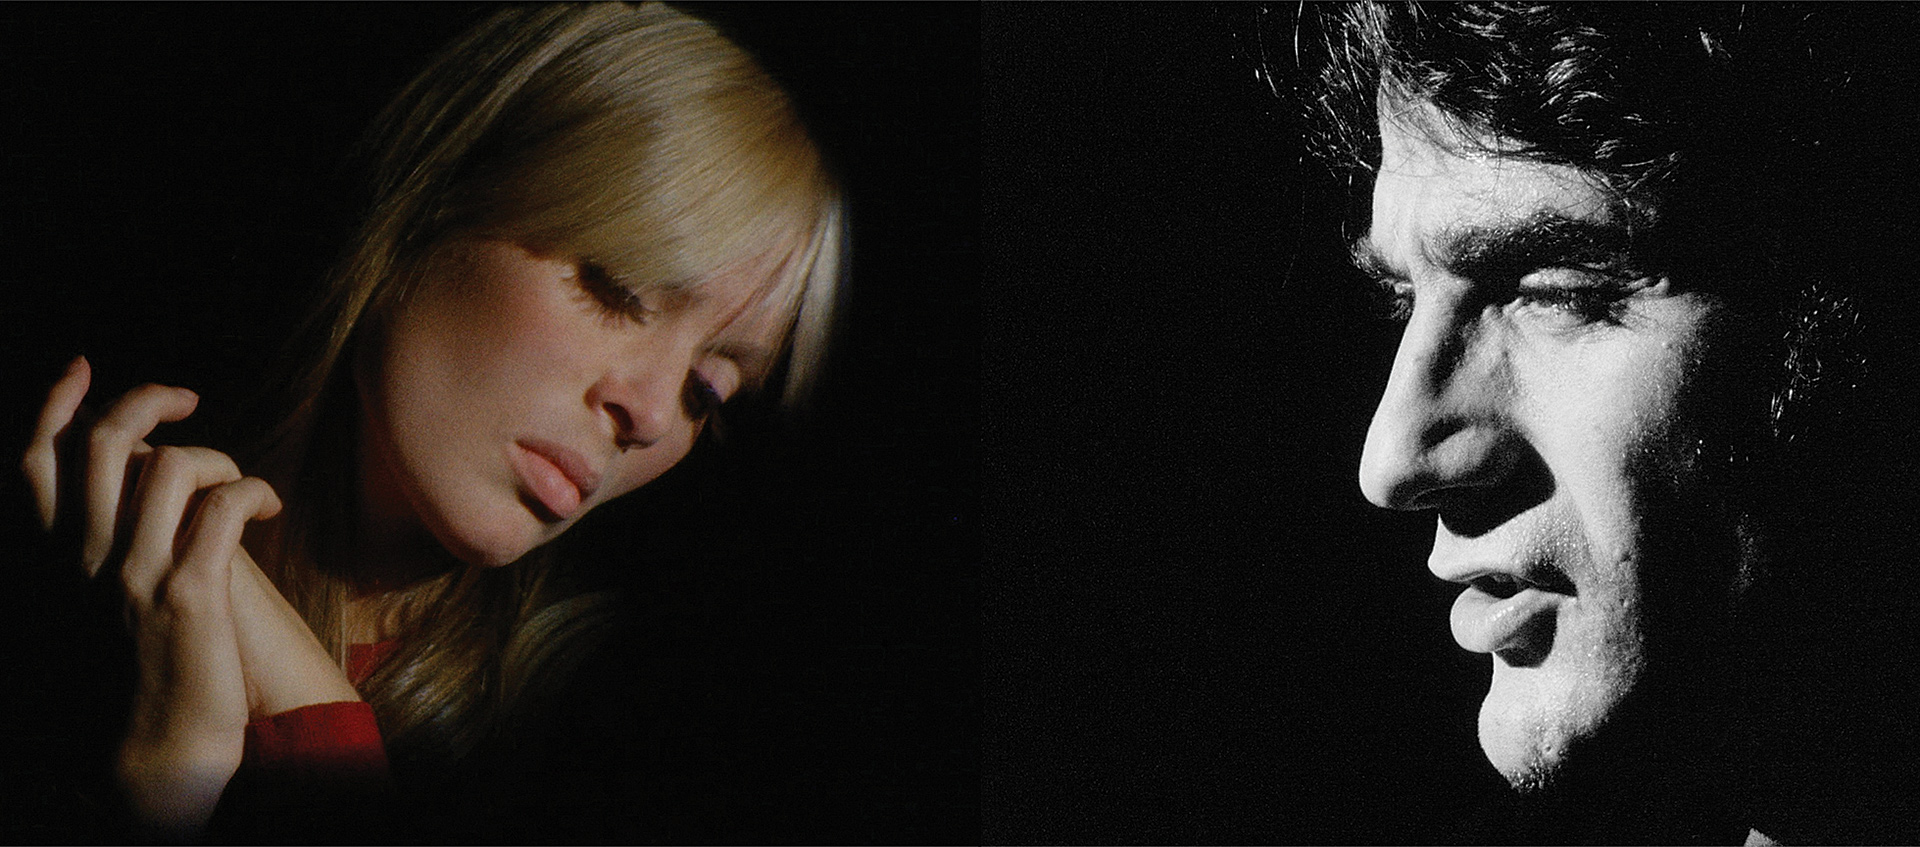 Nico and Ondine in a scene from Andy Warhol's double screen artwork The Chelsea Girls